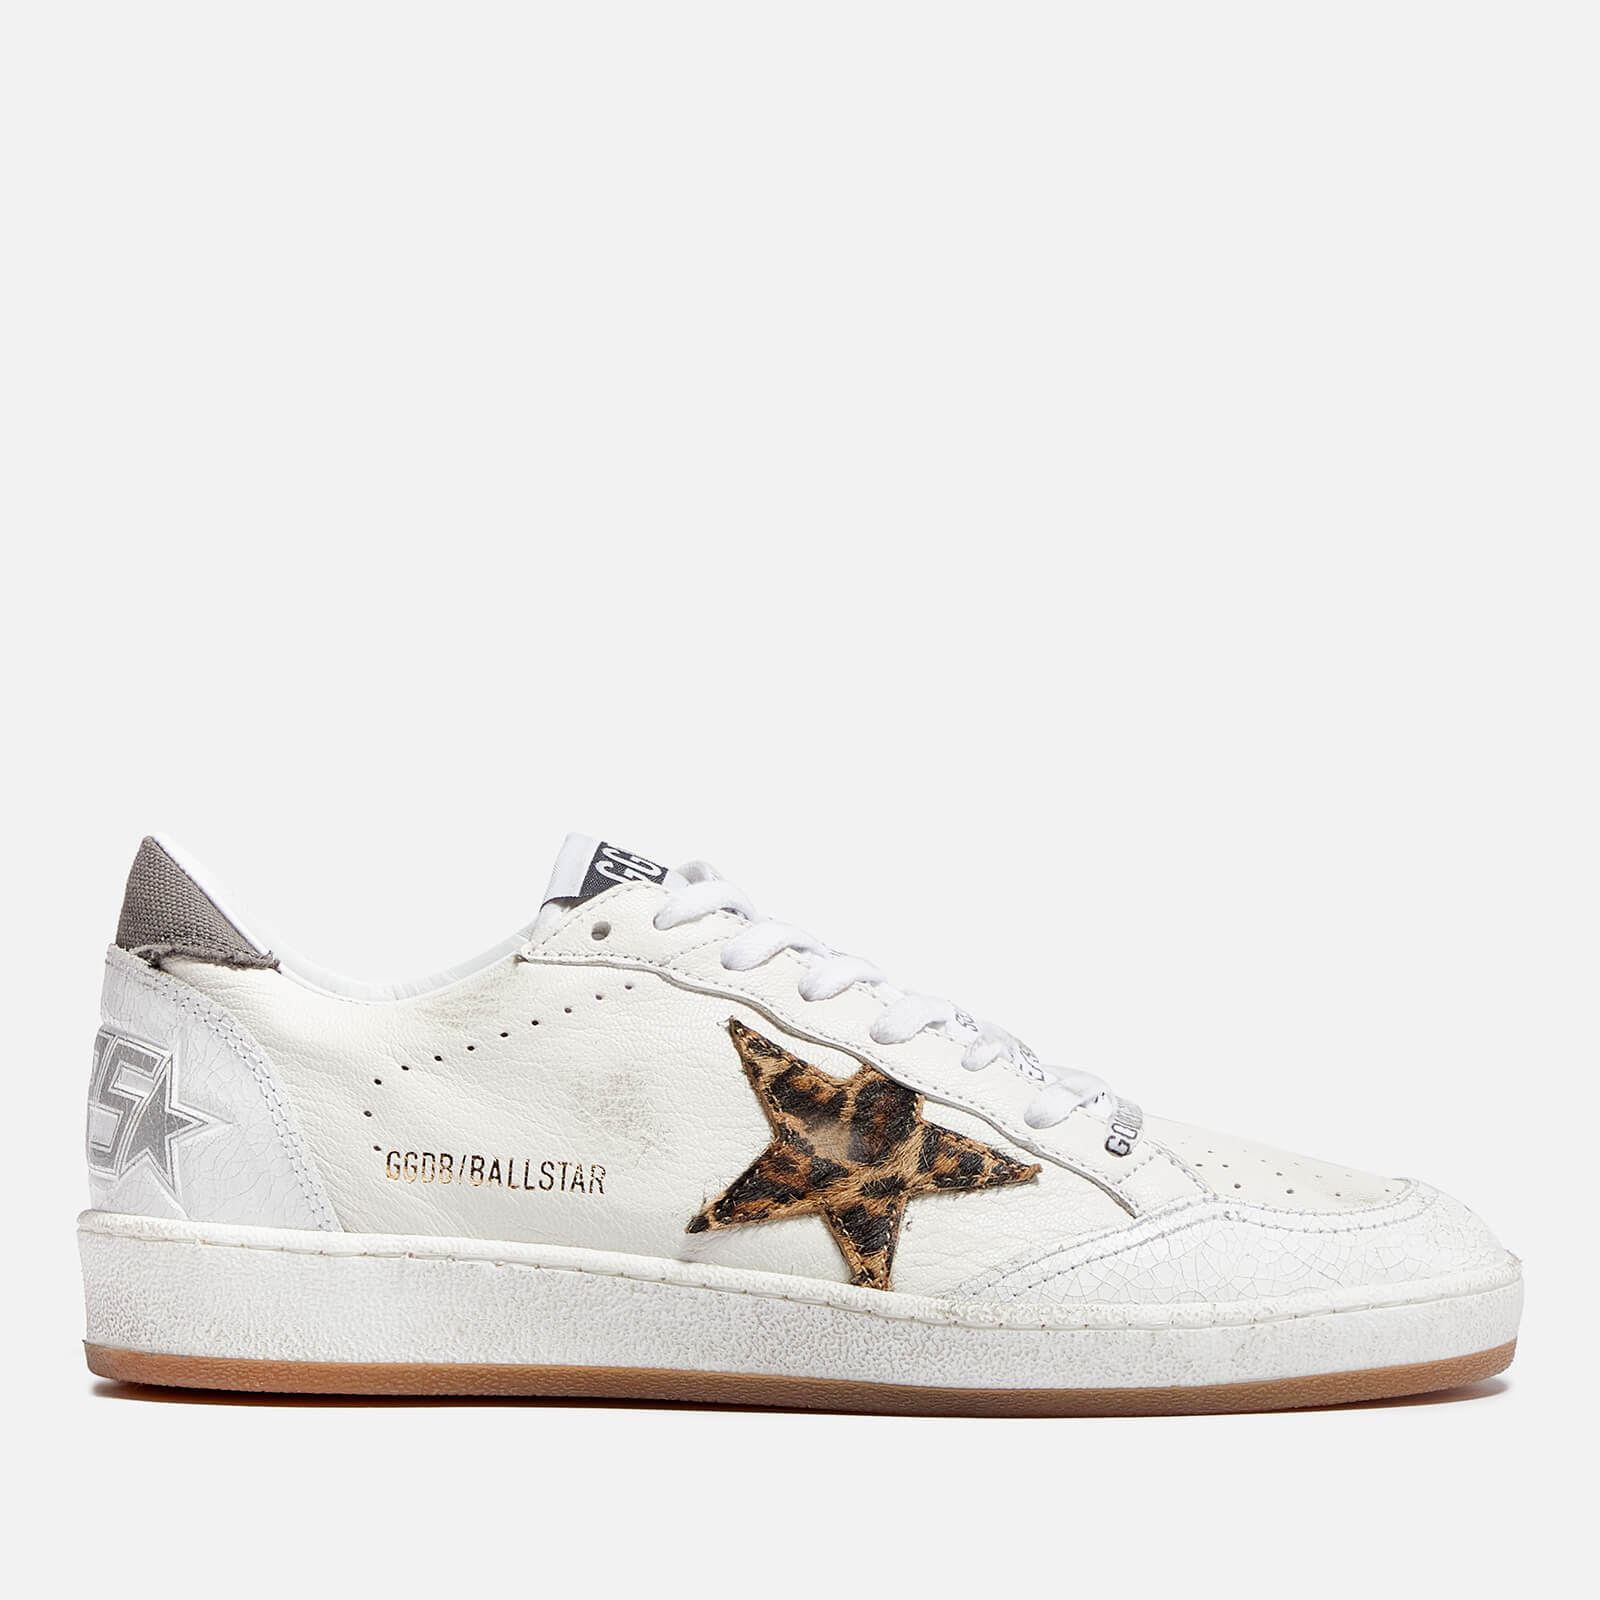 Golden Goose Ball Star Distressed Leather Trainers - UK 5